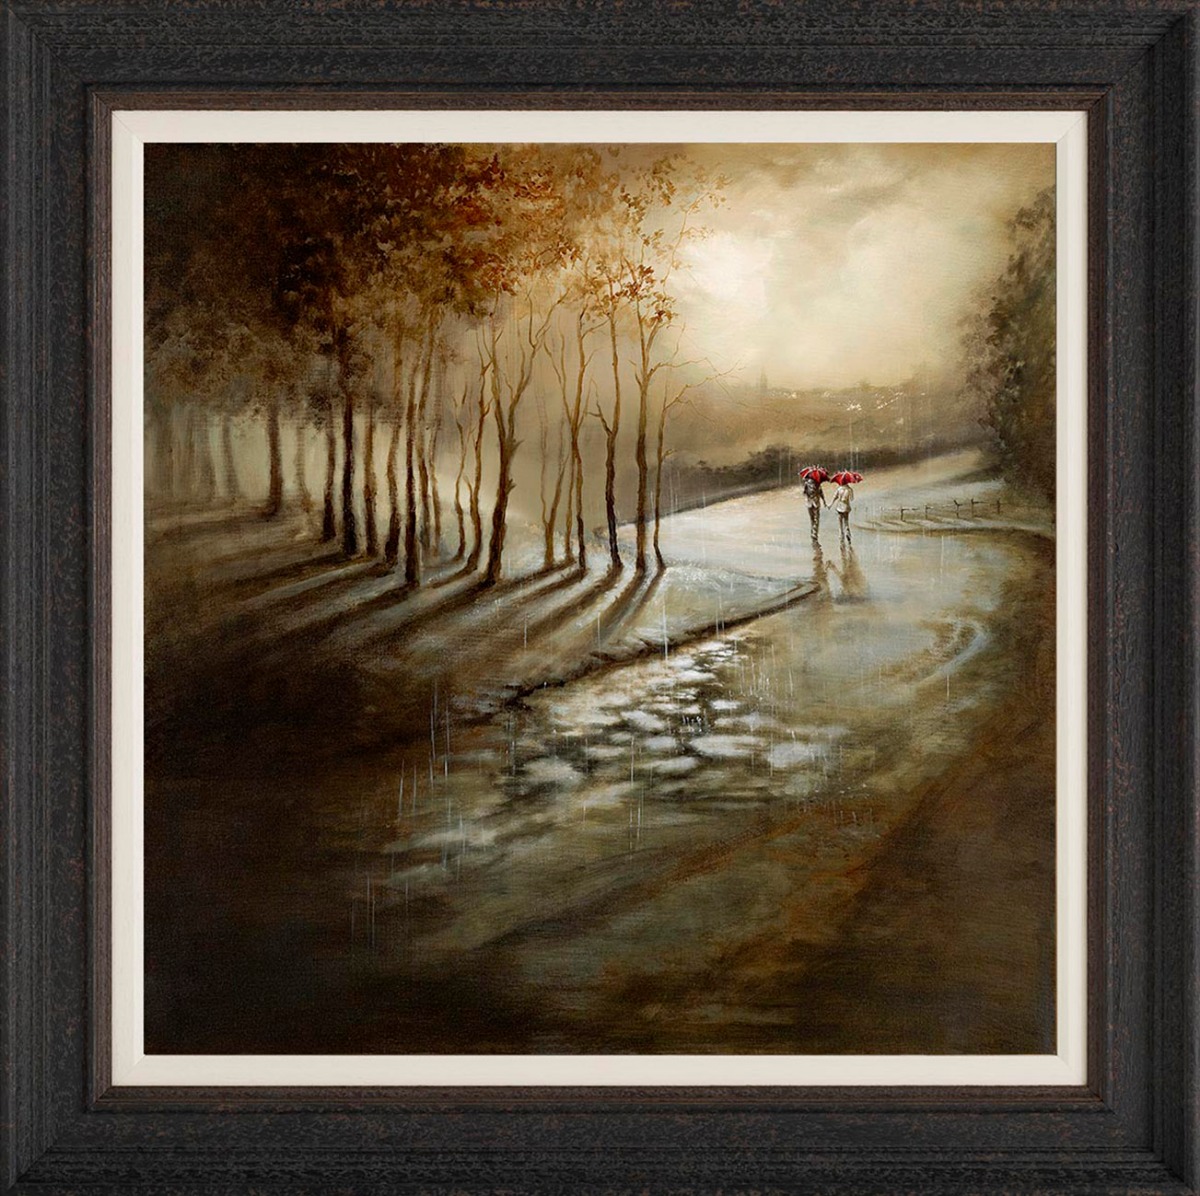 Happiness is... by Bob Barker, Love | Couple | Romance